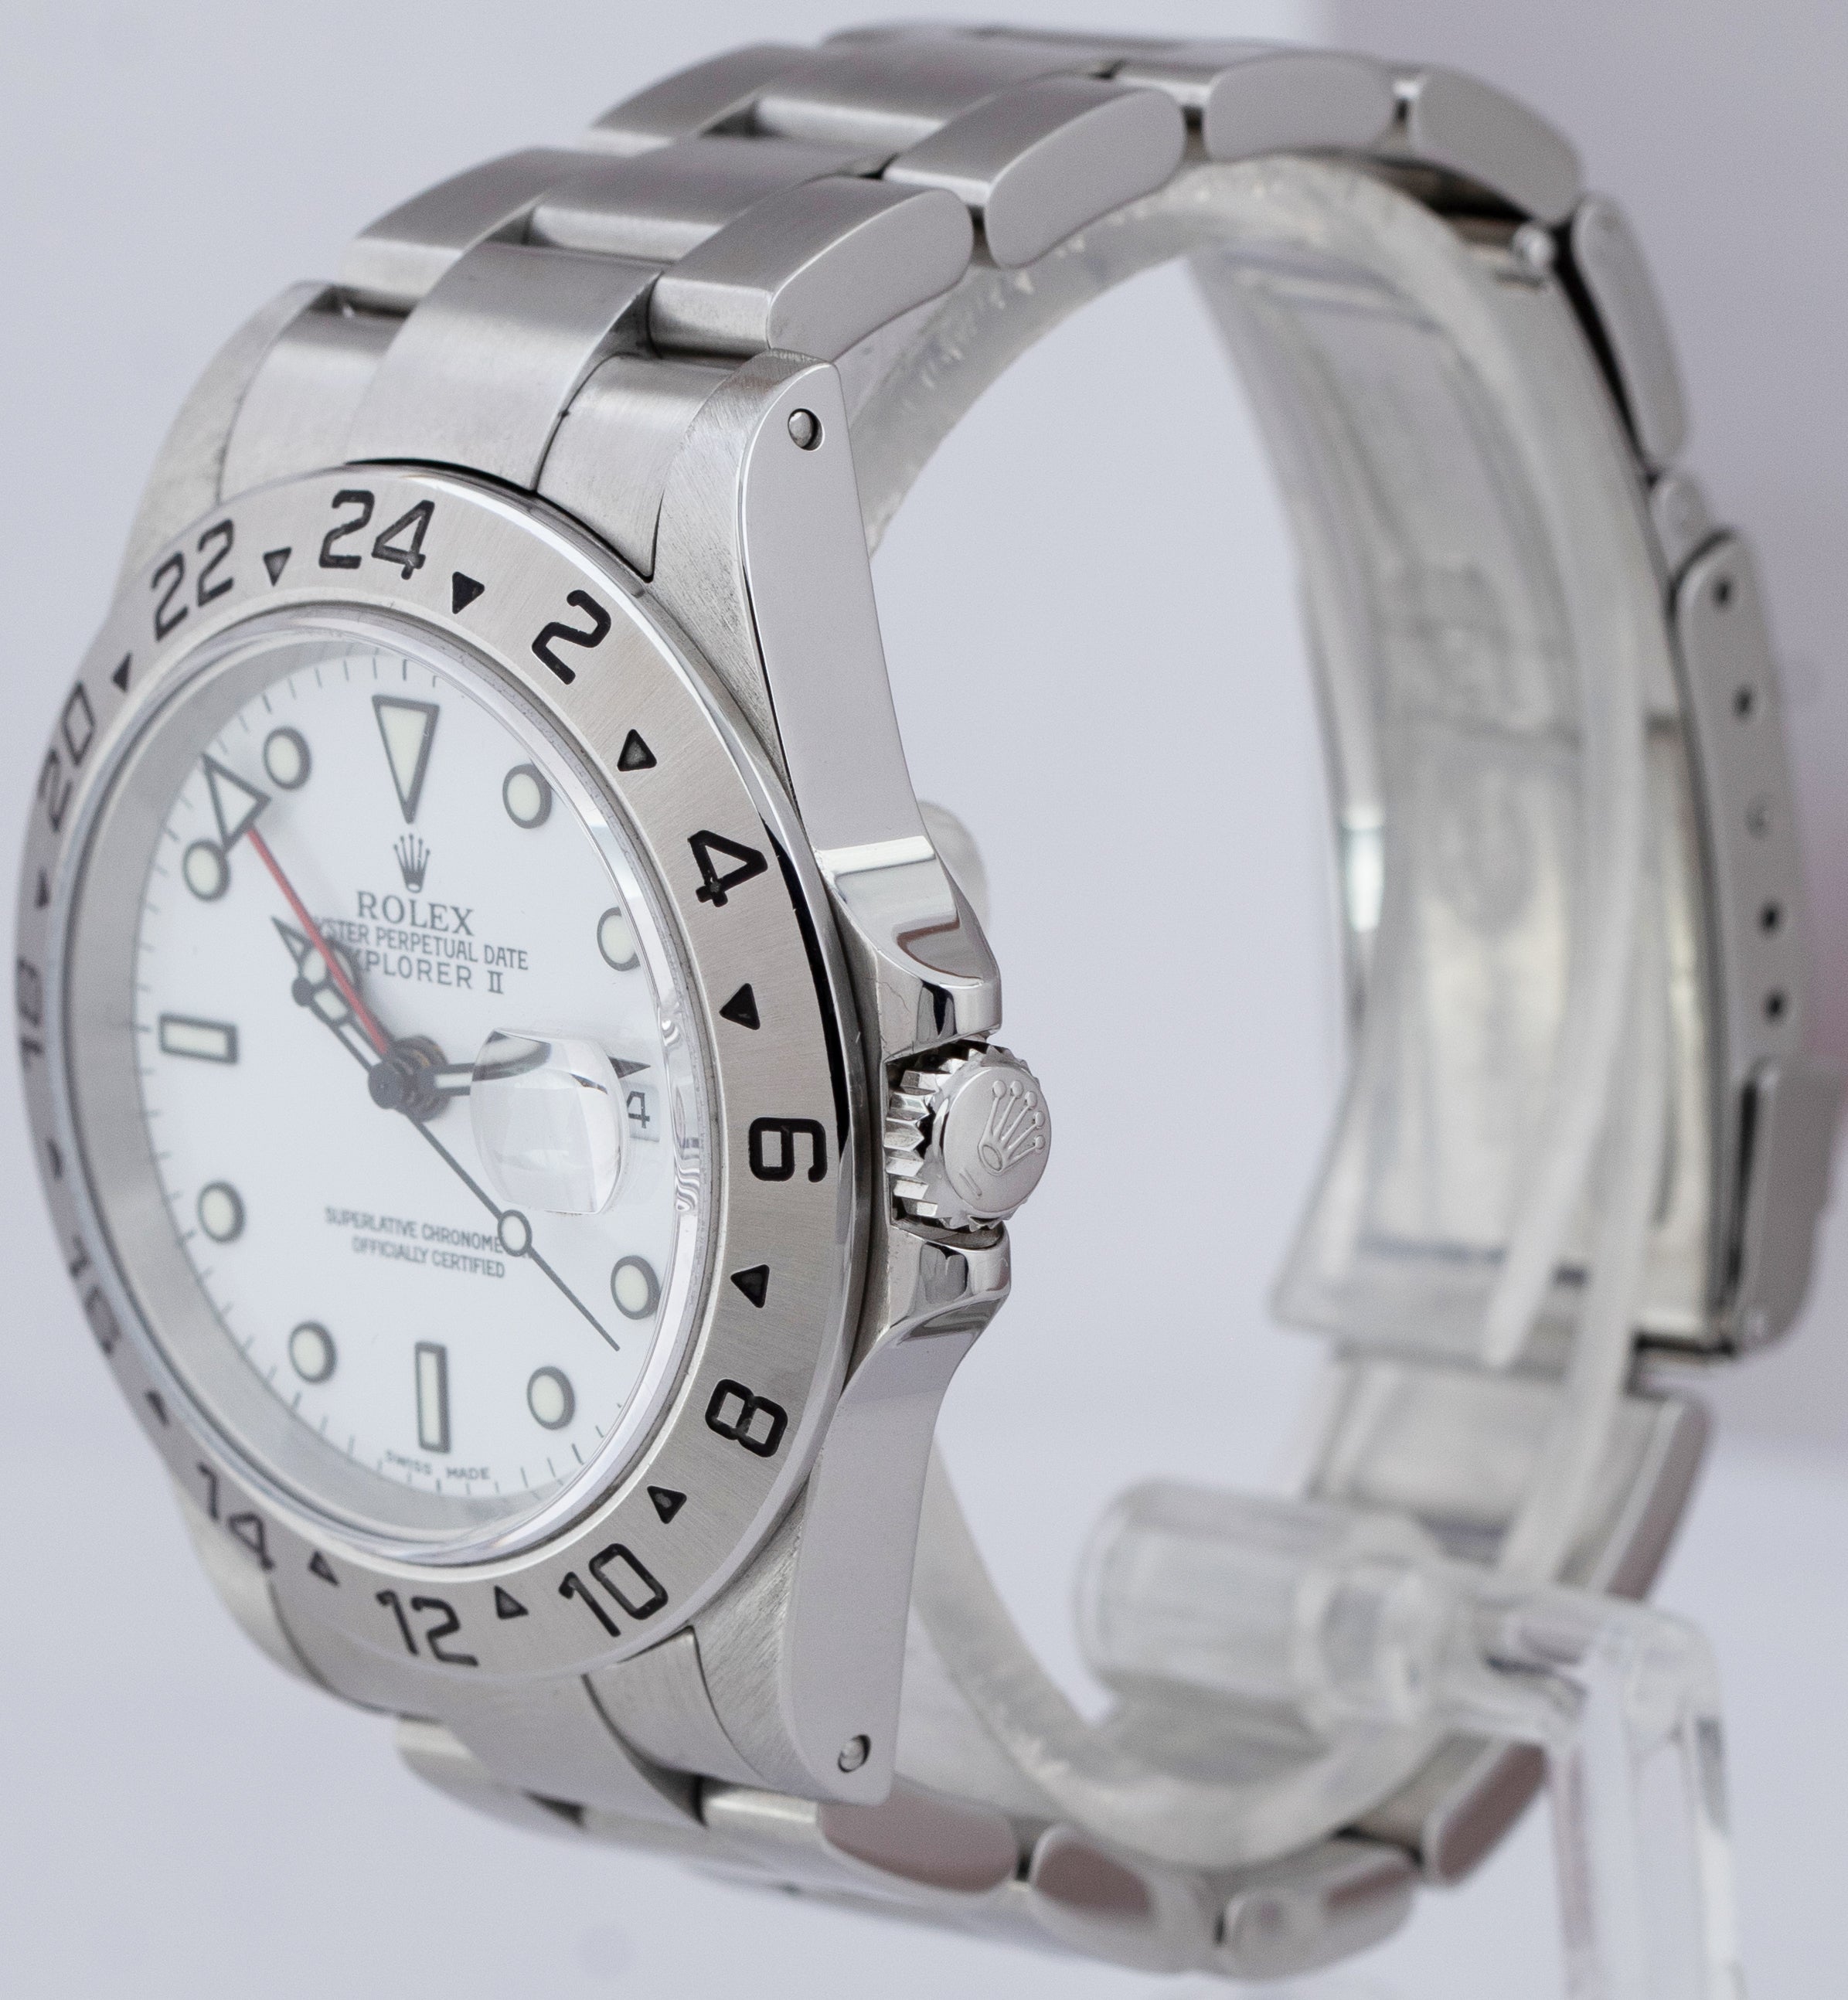 Rolex Explorer II Polar White Stainless Steel GMT SEL Oyster 40mm Watch 16570